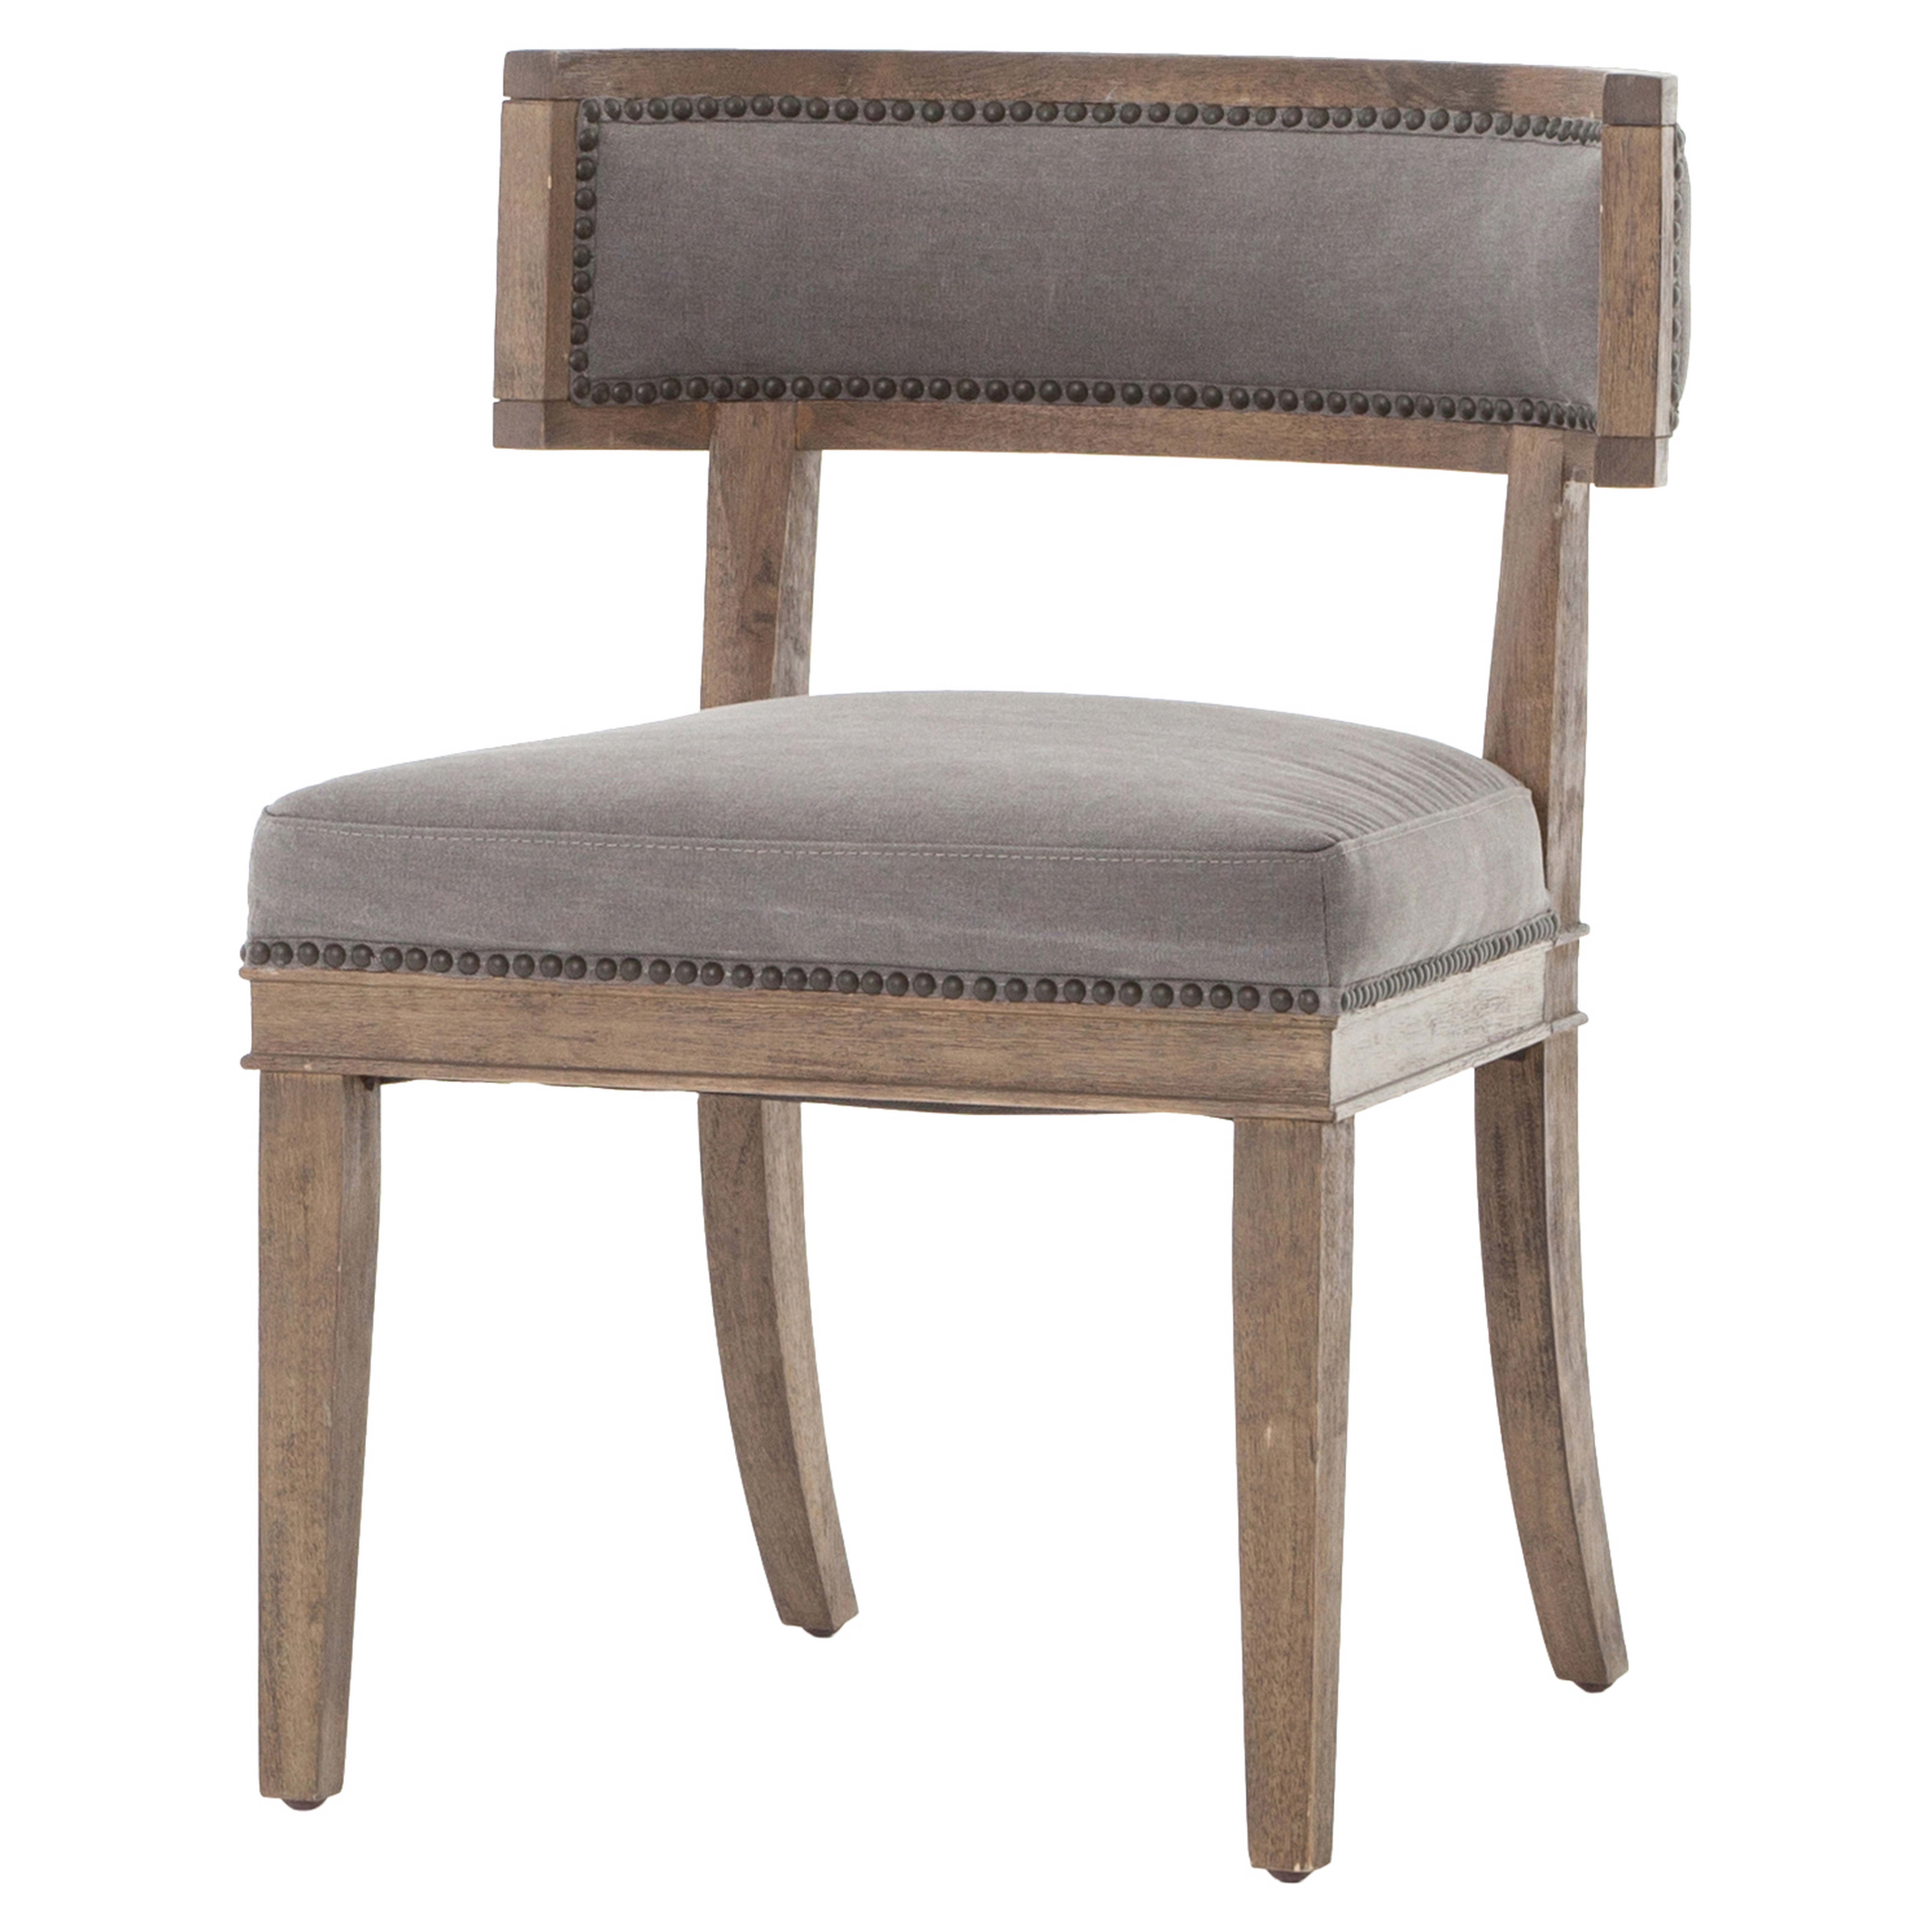 Livingston Modern Classic Curved Back Charcoal Grey Cotton Dining Chair - Kathy Kuo Home